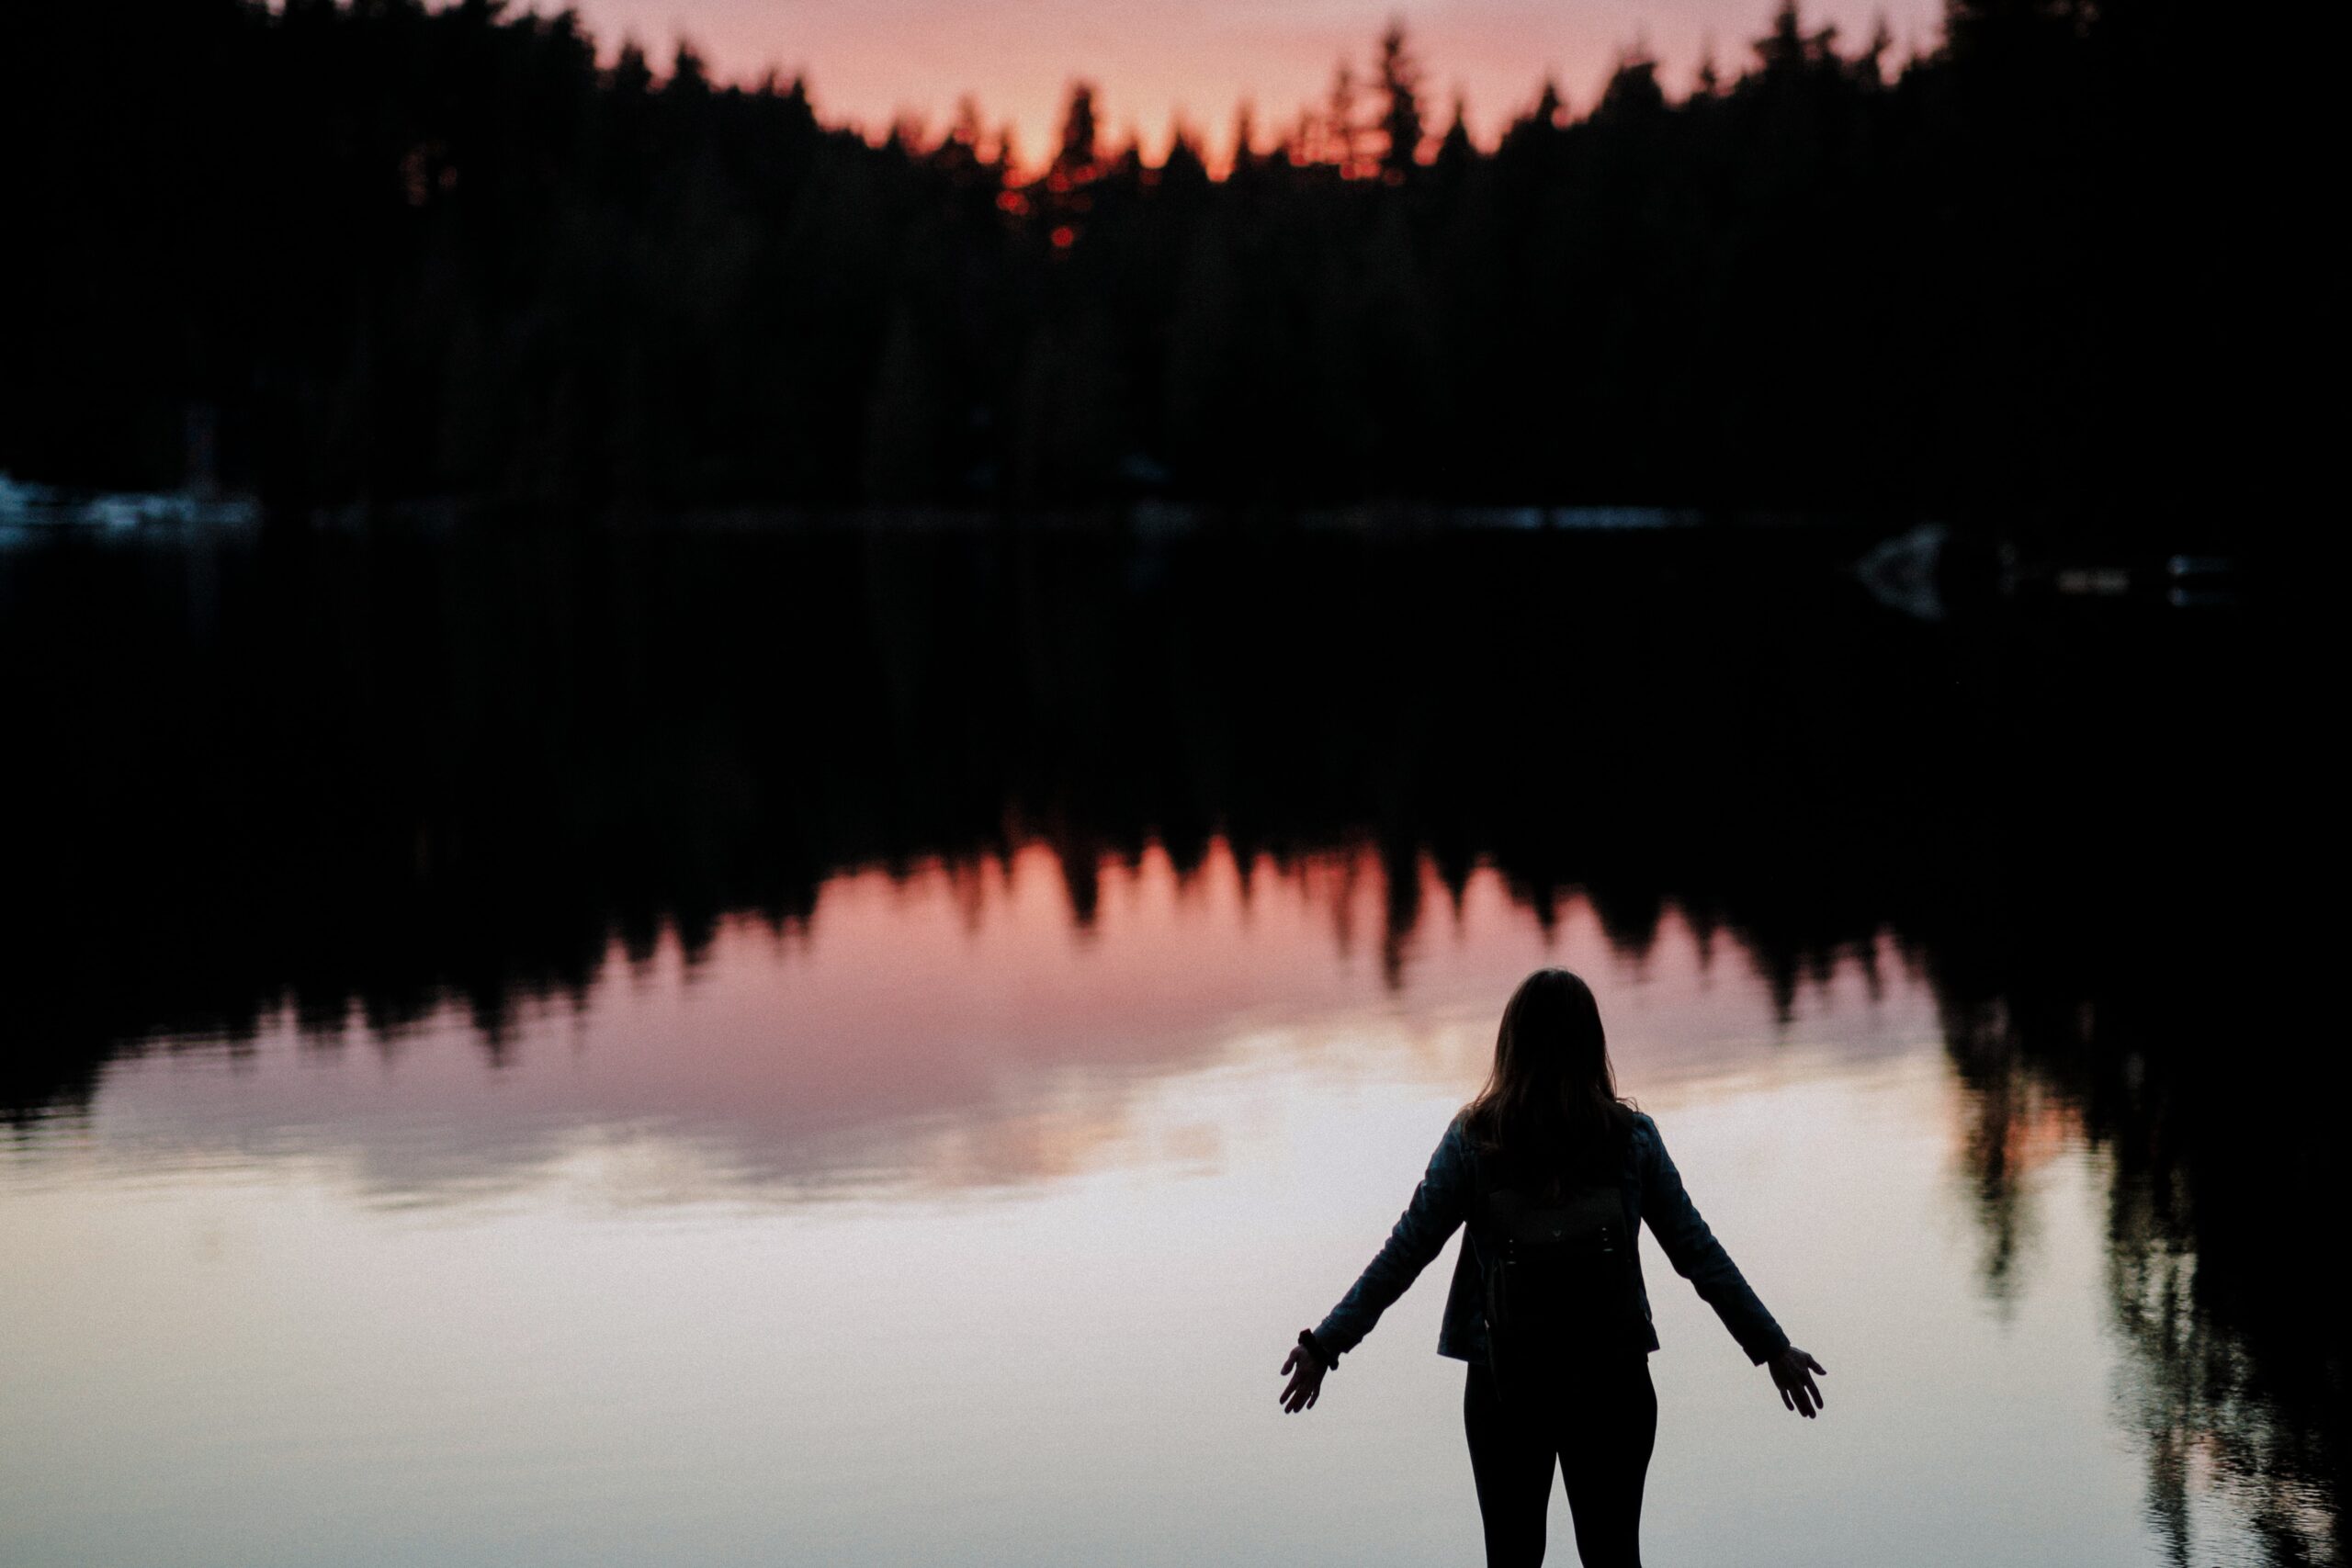 The silhouette of a woman overlooking a serene lake surrounded by trees